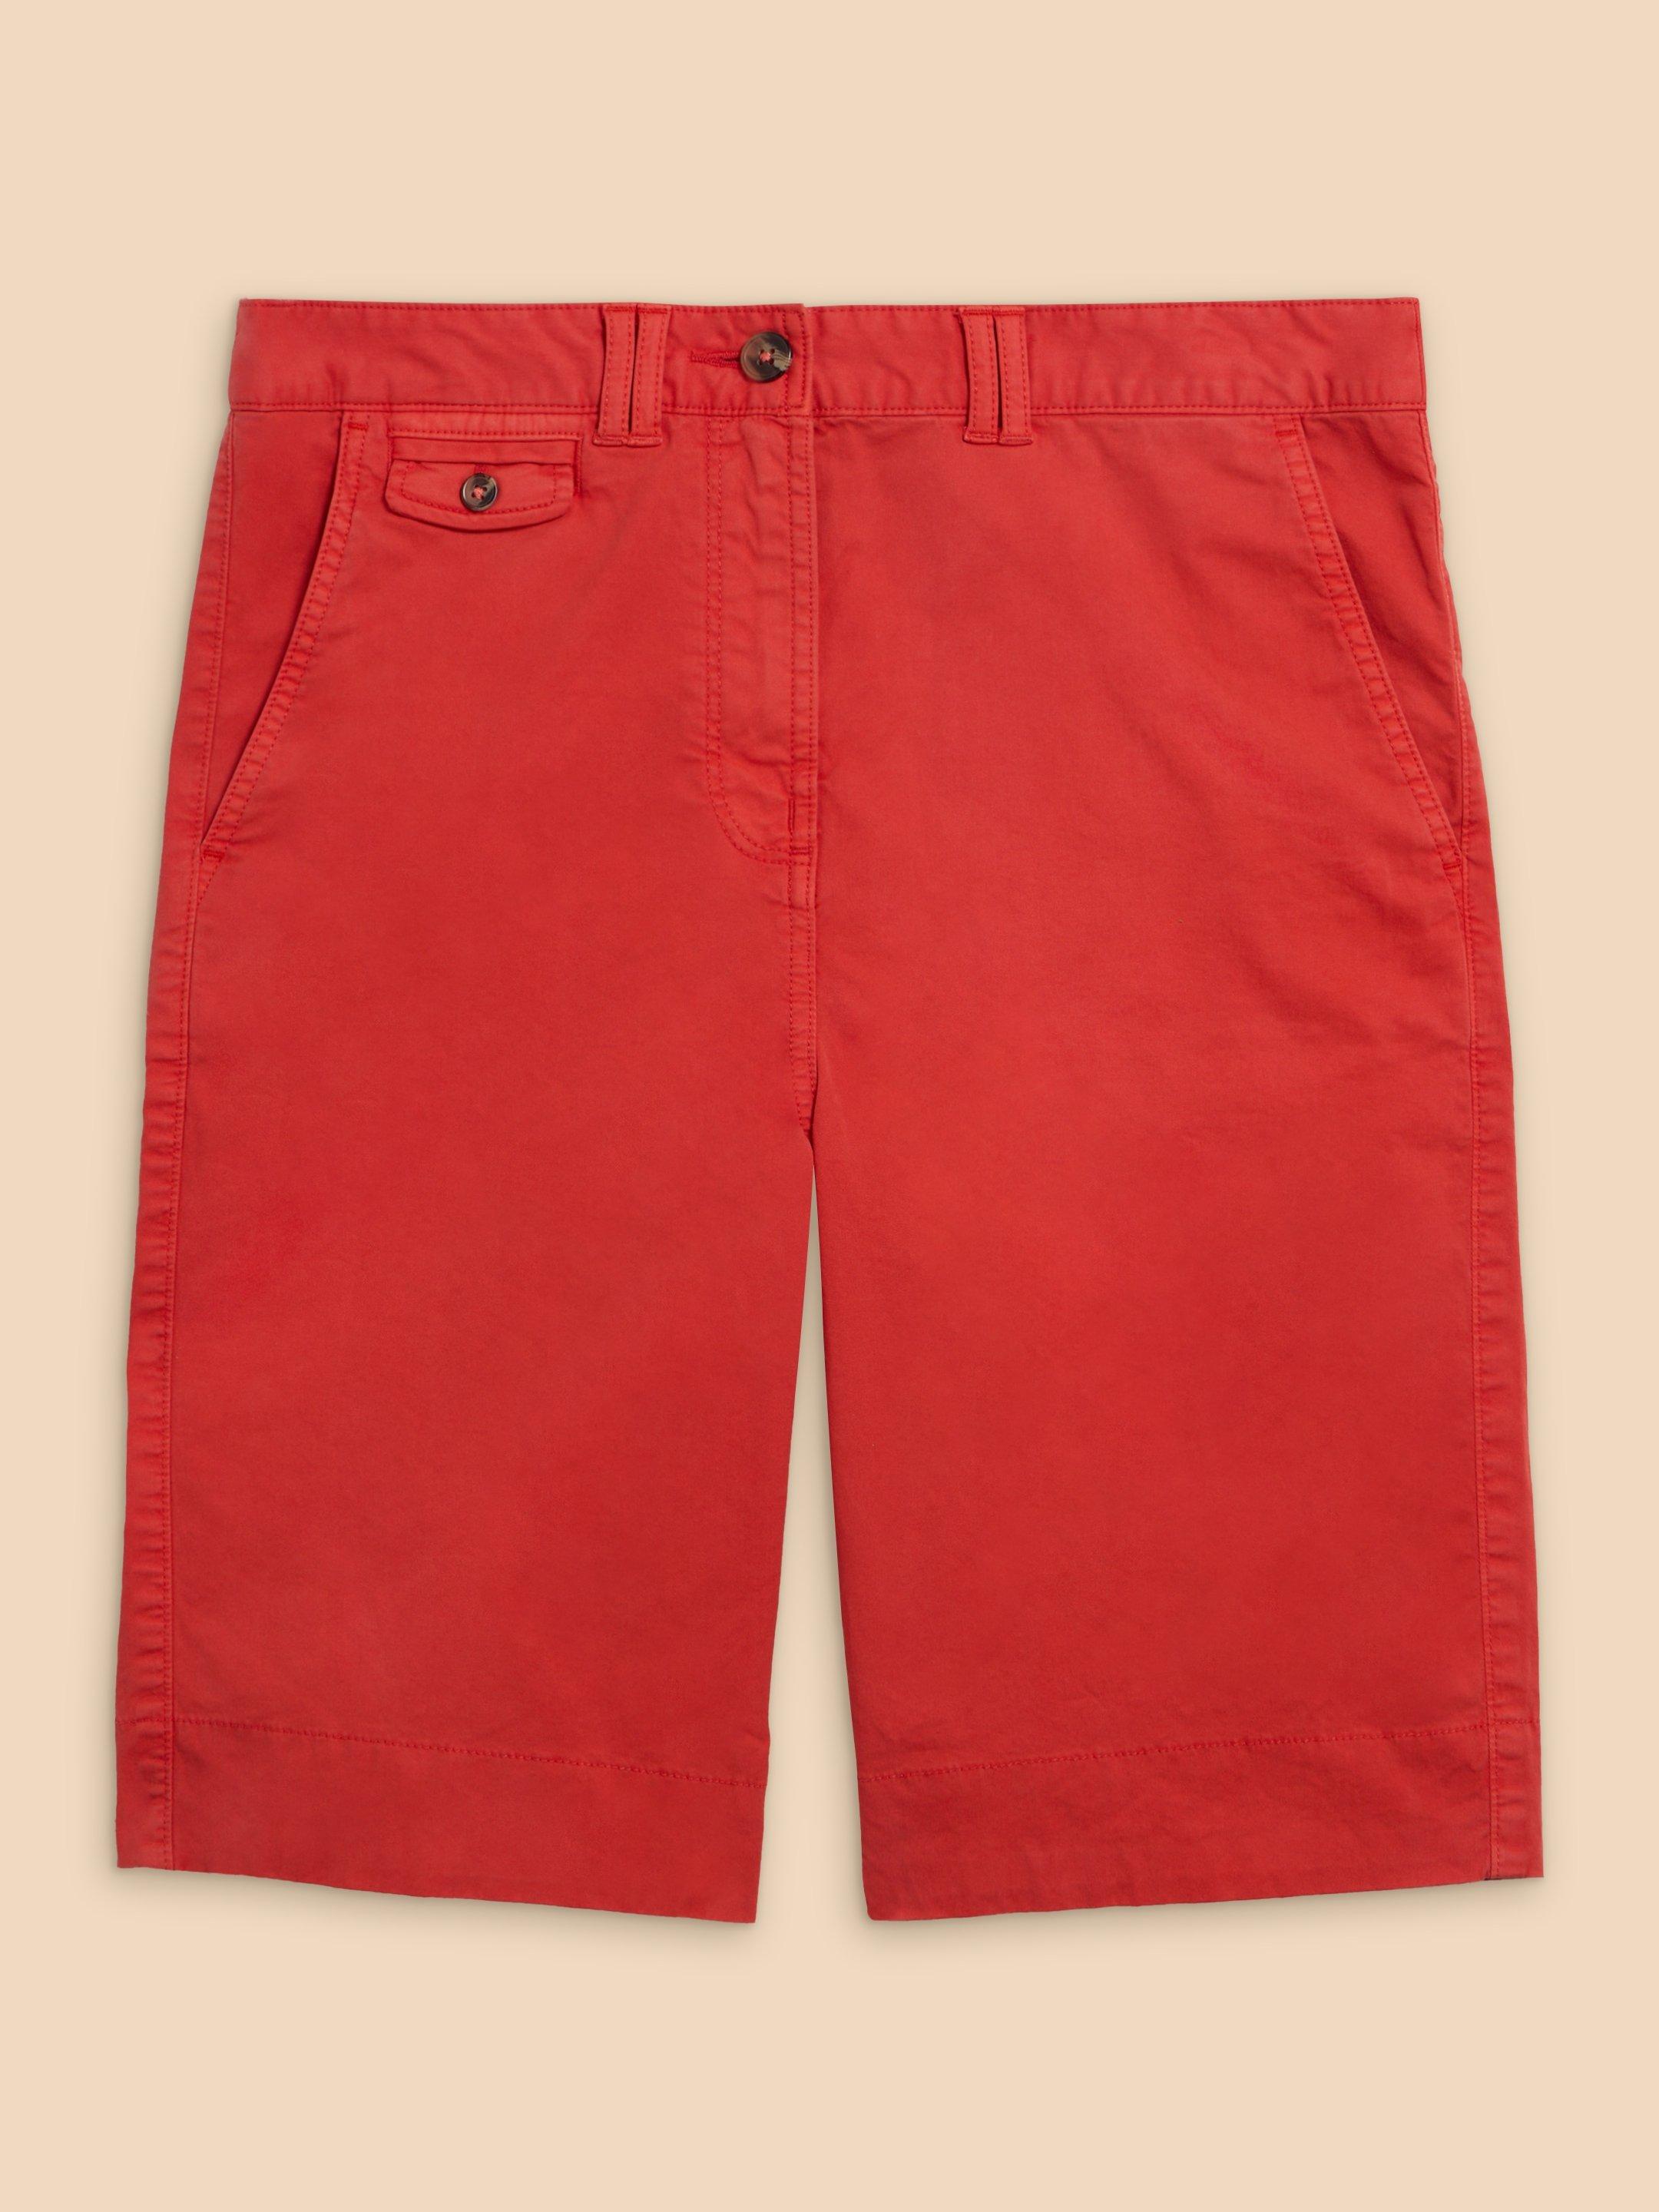 Hayley Organic Cotton Shorts in BRT RED - FLAT FRONT